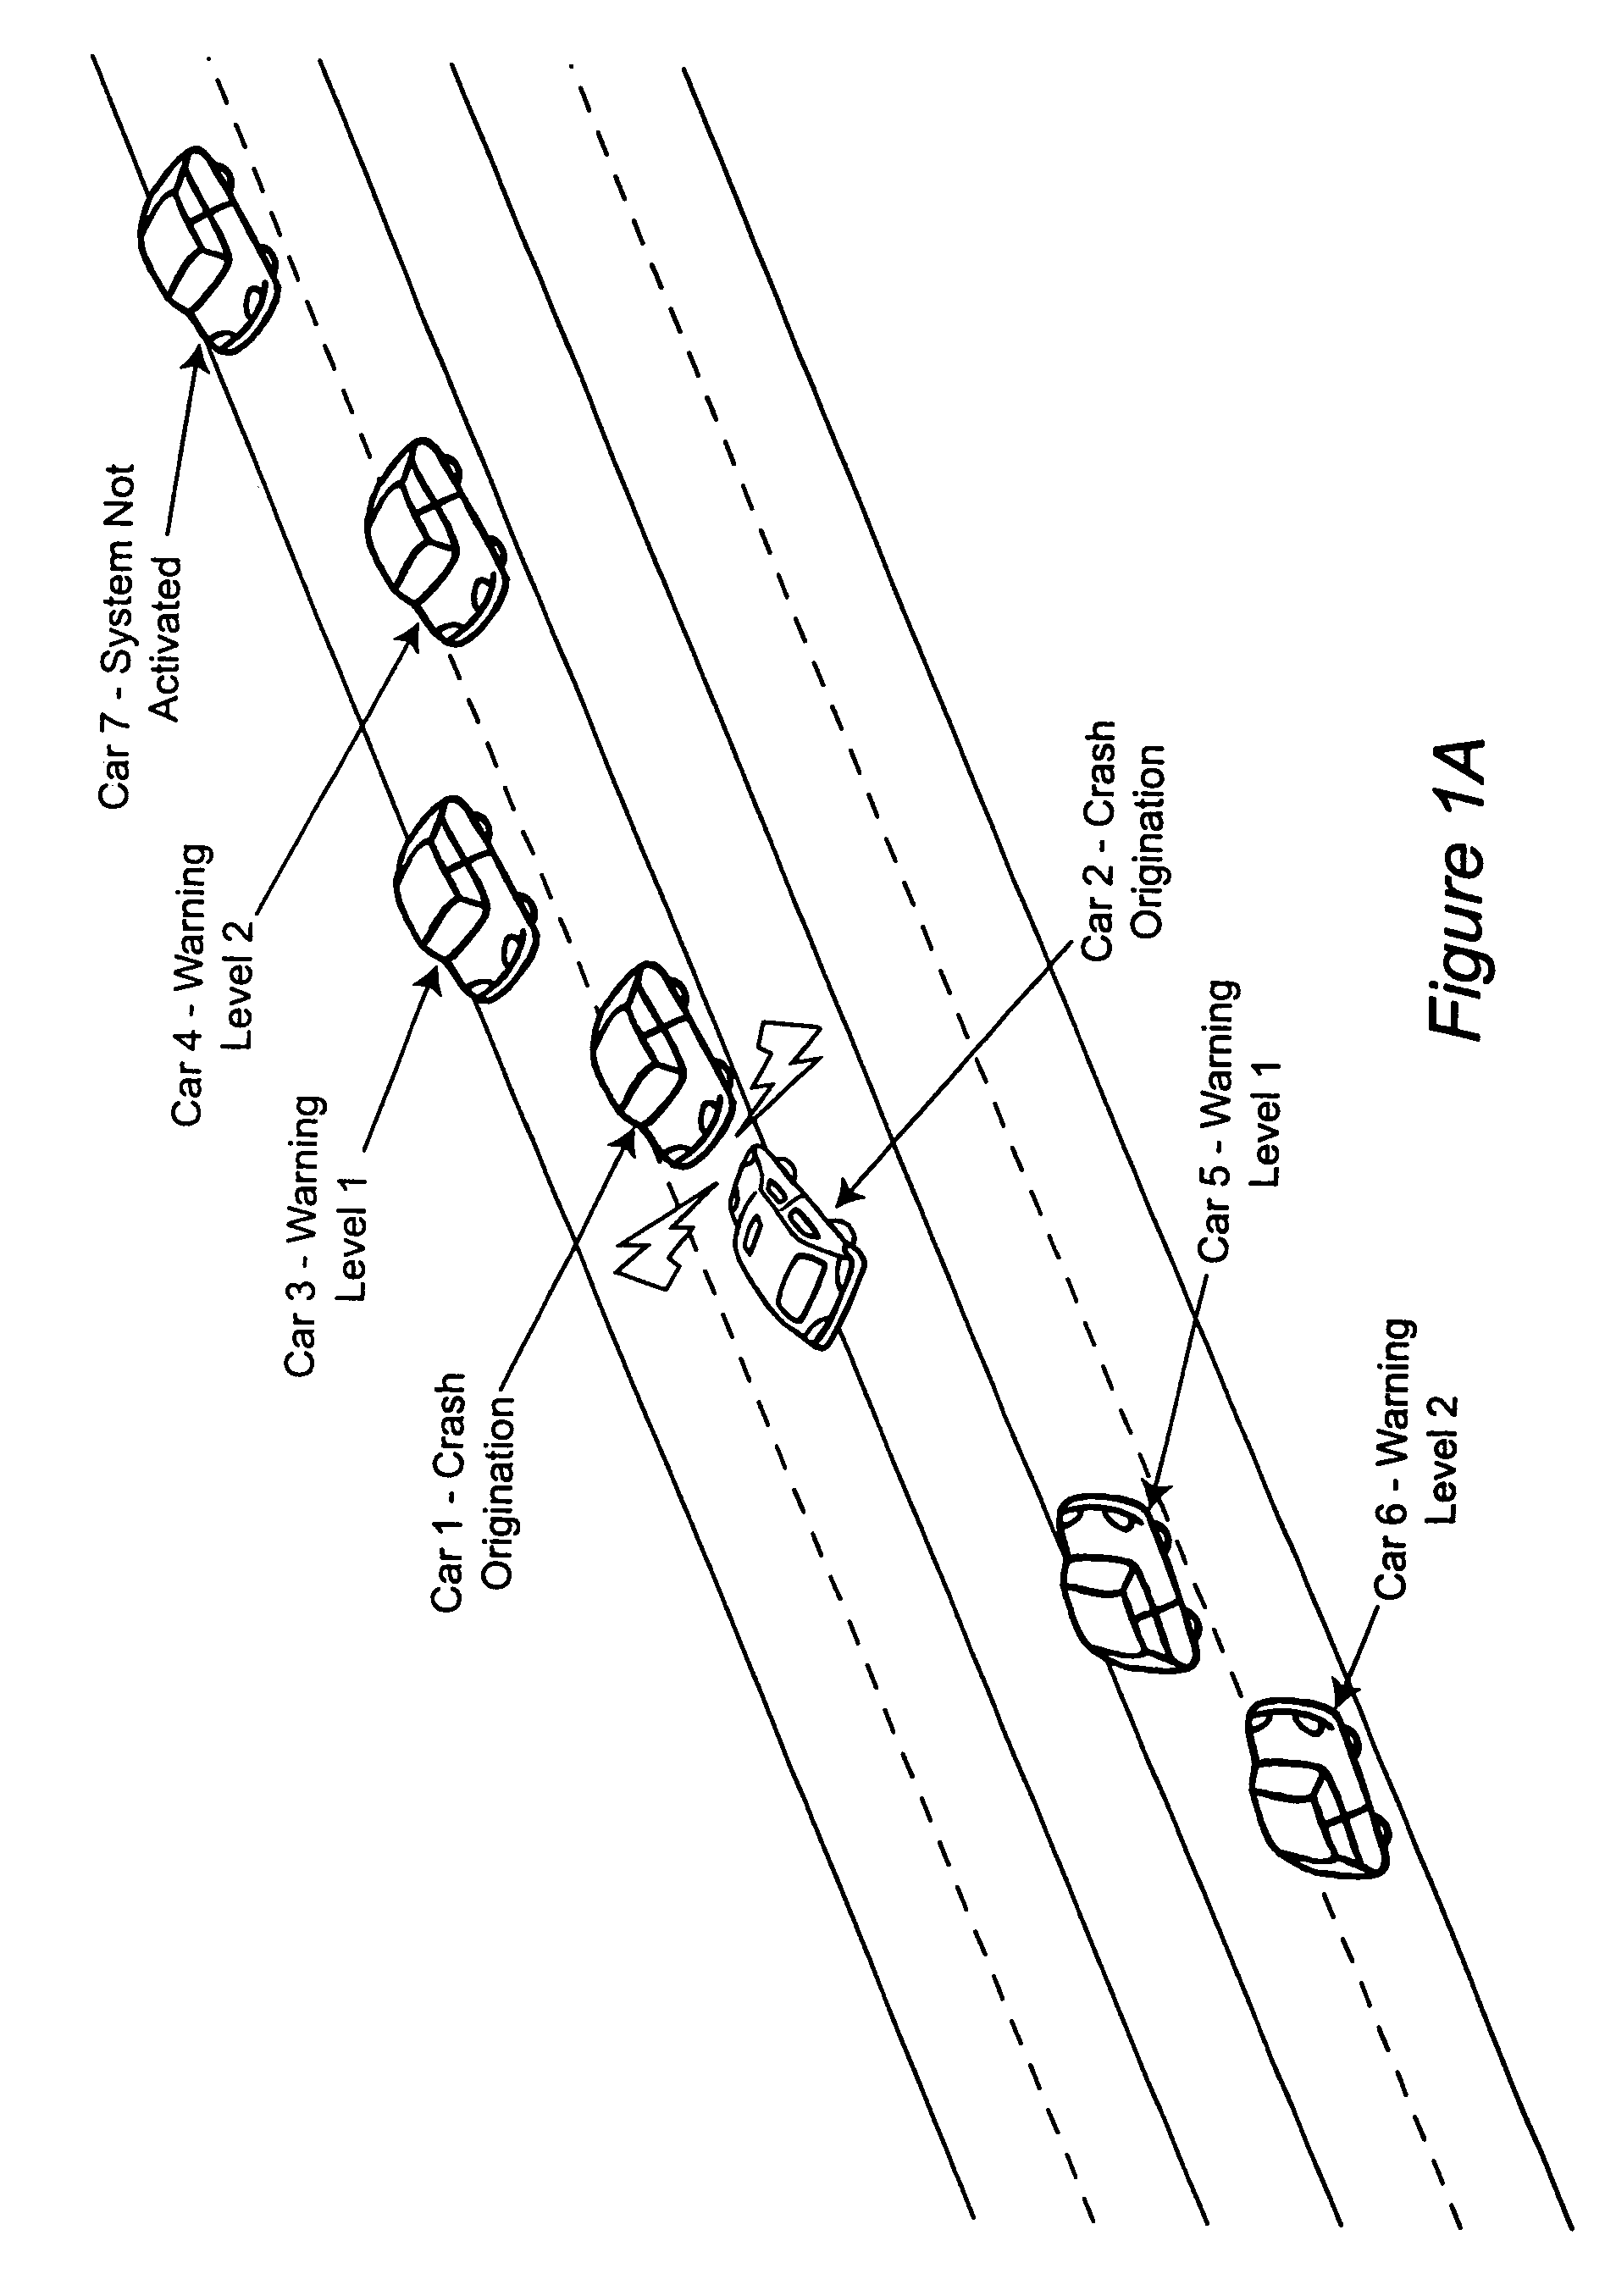 Vehicle collision avoidance system enhancement using in-car air bag deployment system